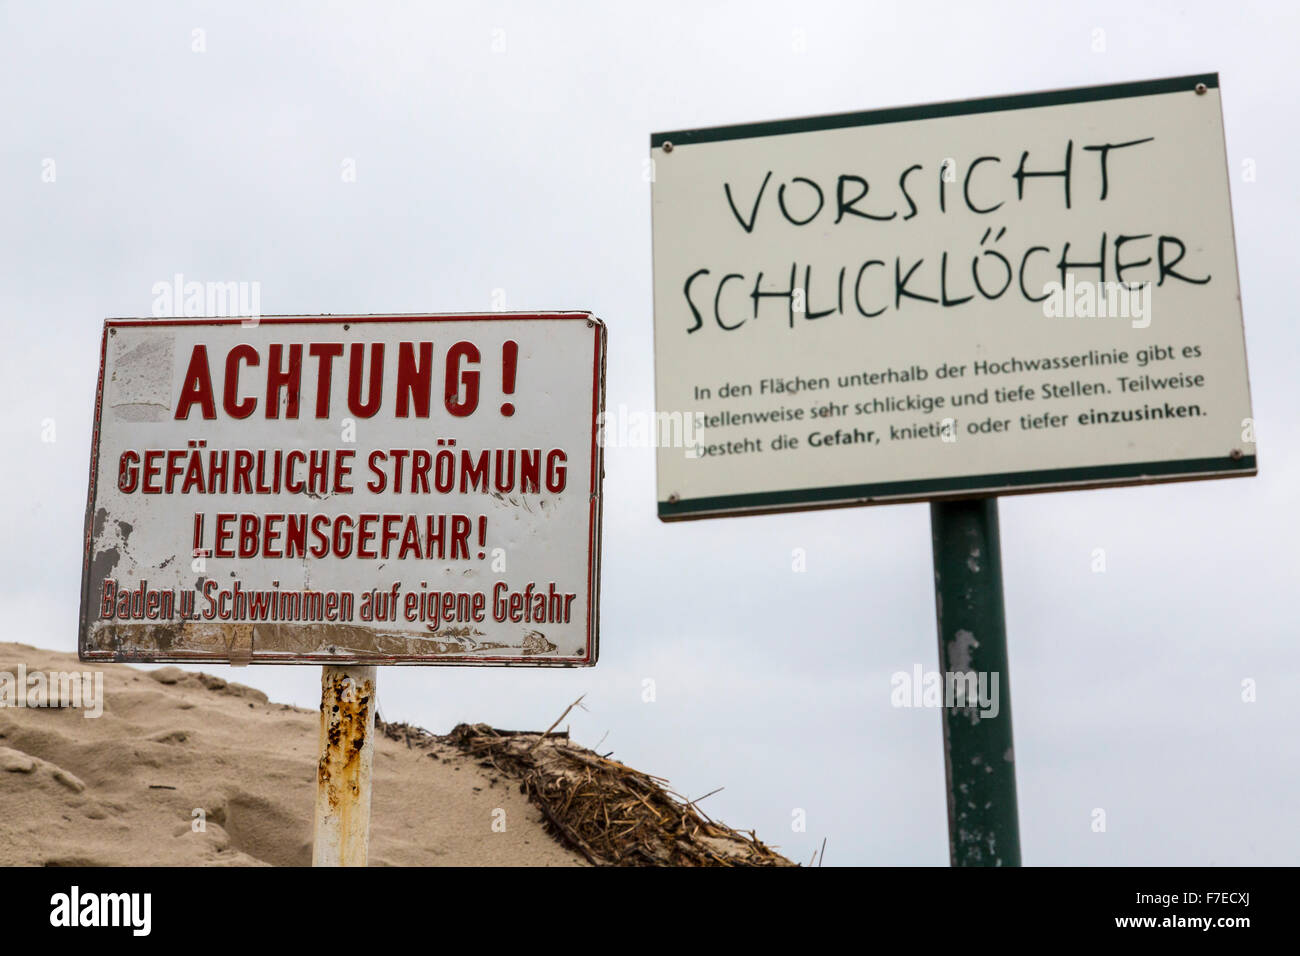 Warning signs at the beach of North Sea island Spiekeroog, Germany, beware of strong currents along the beach and mud holes, Stock Photo